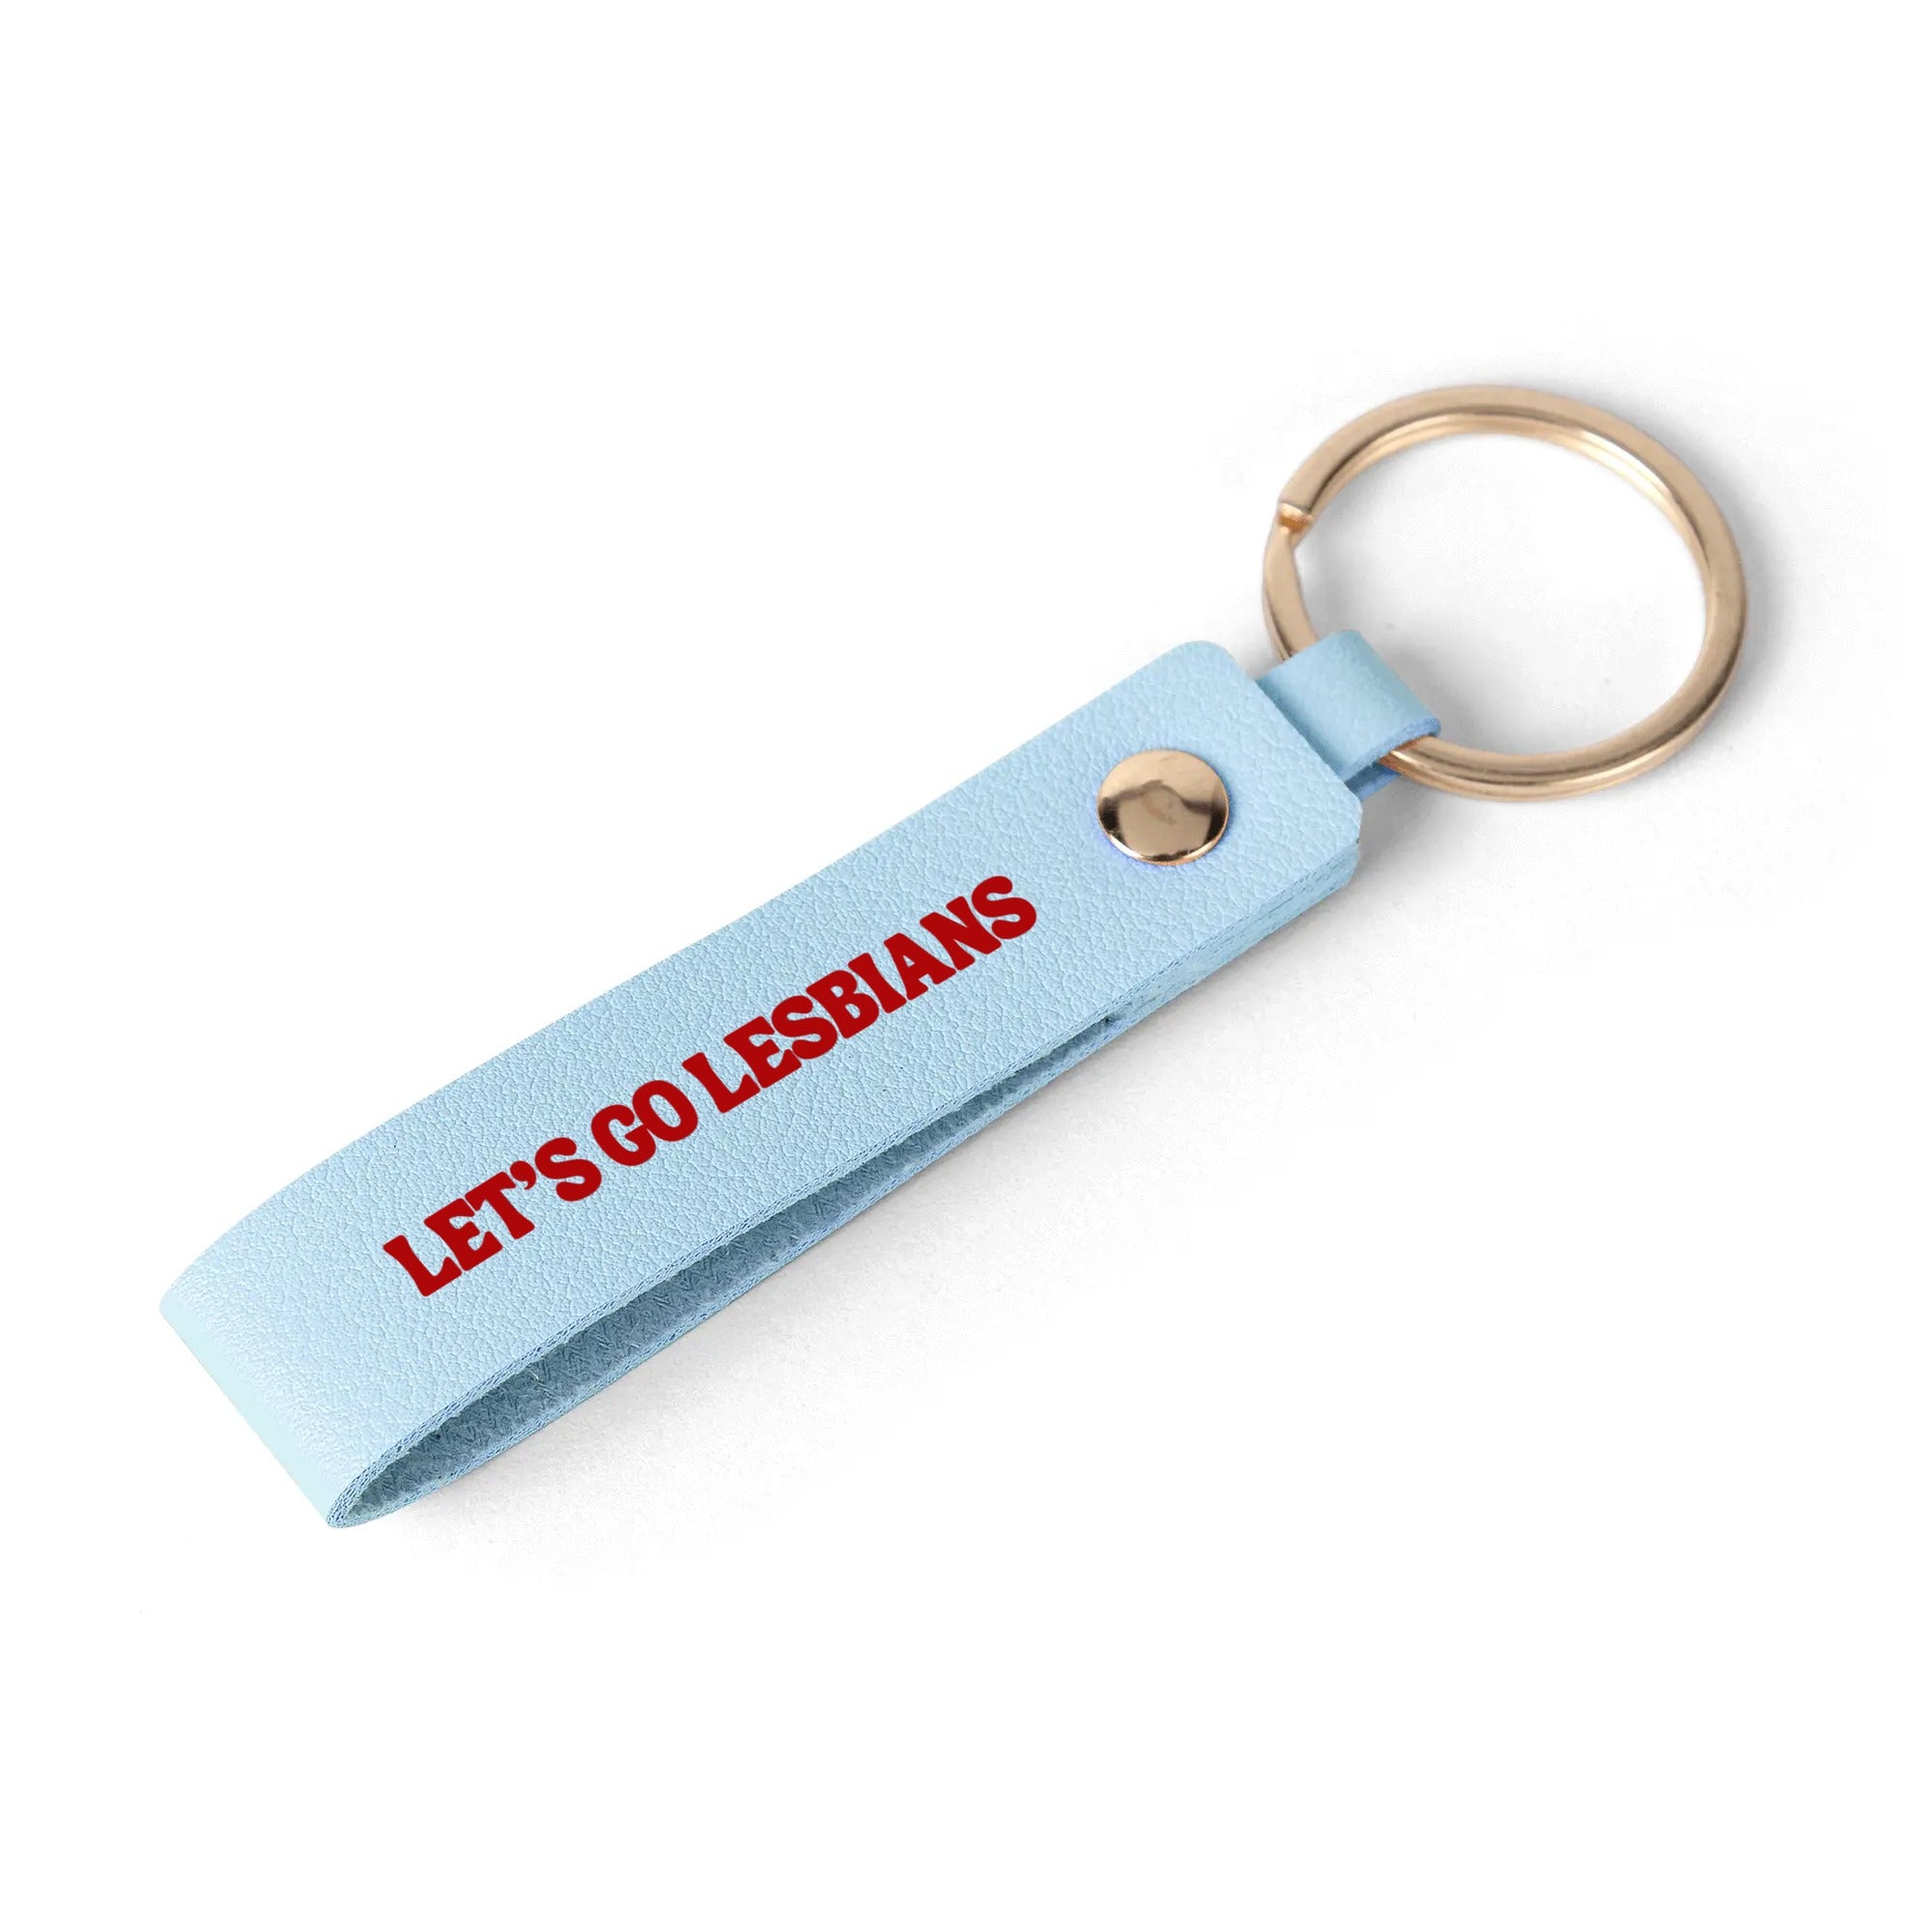 Let's Go Lesbians Handcrafted Leather Loop Keychain